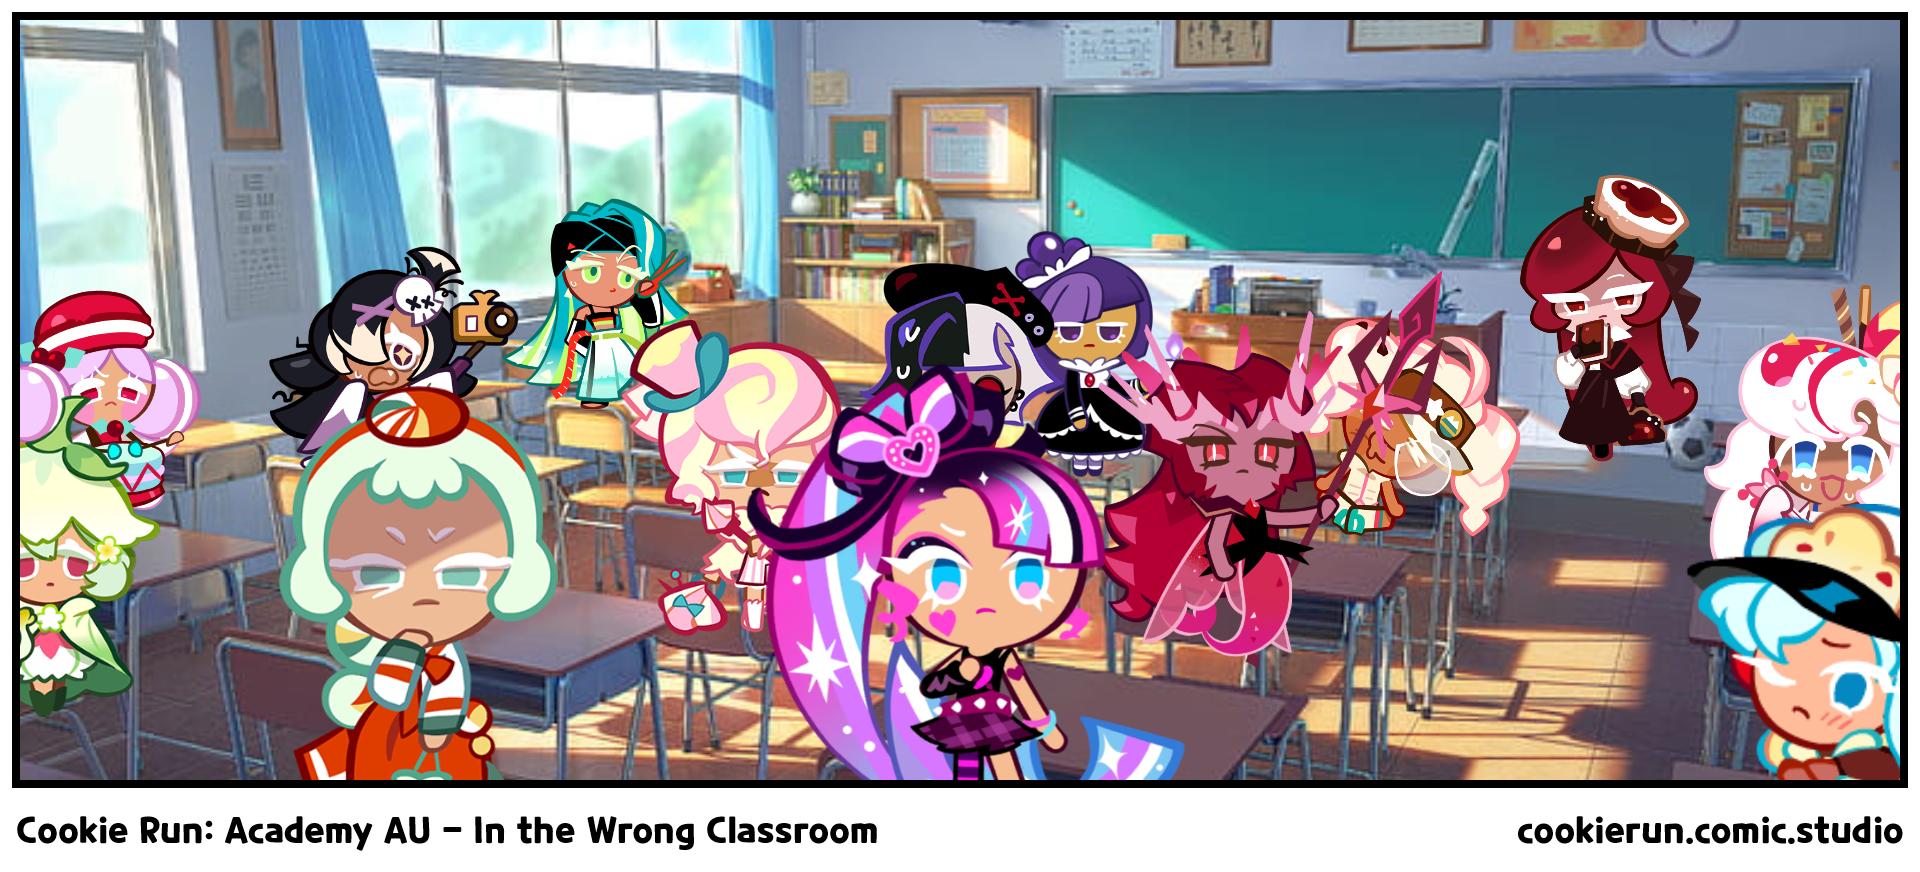 Cookie Run: Academy AU - In the Wrong Classroom